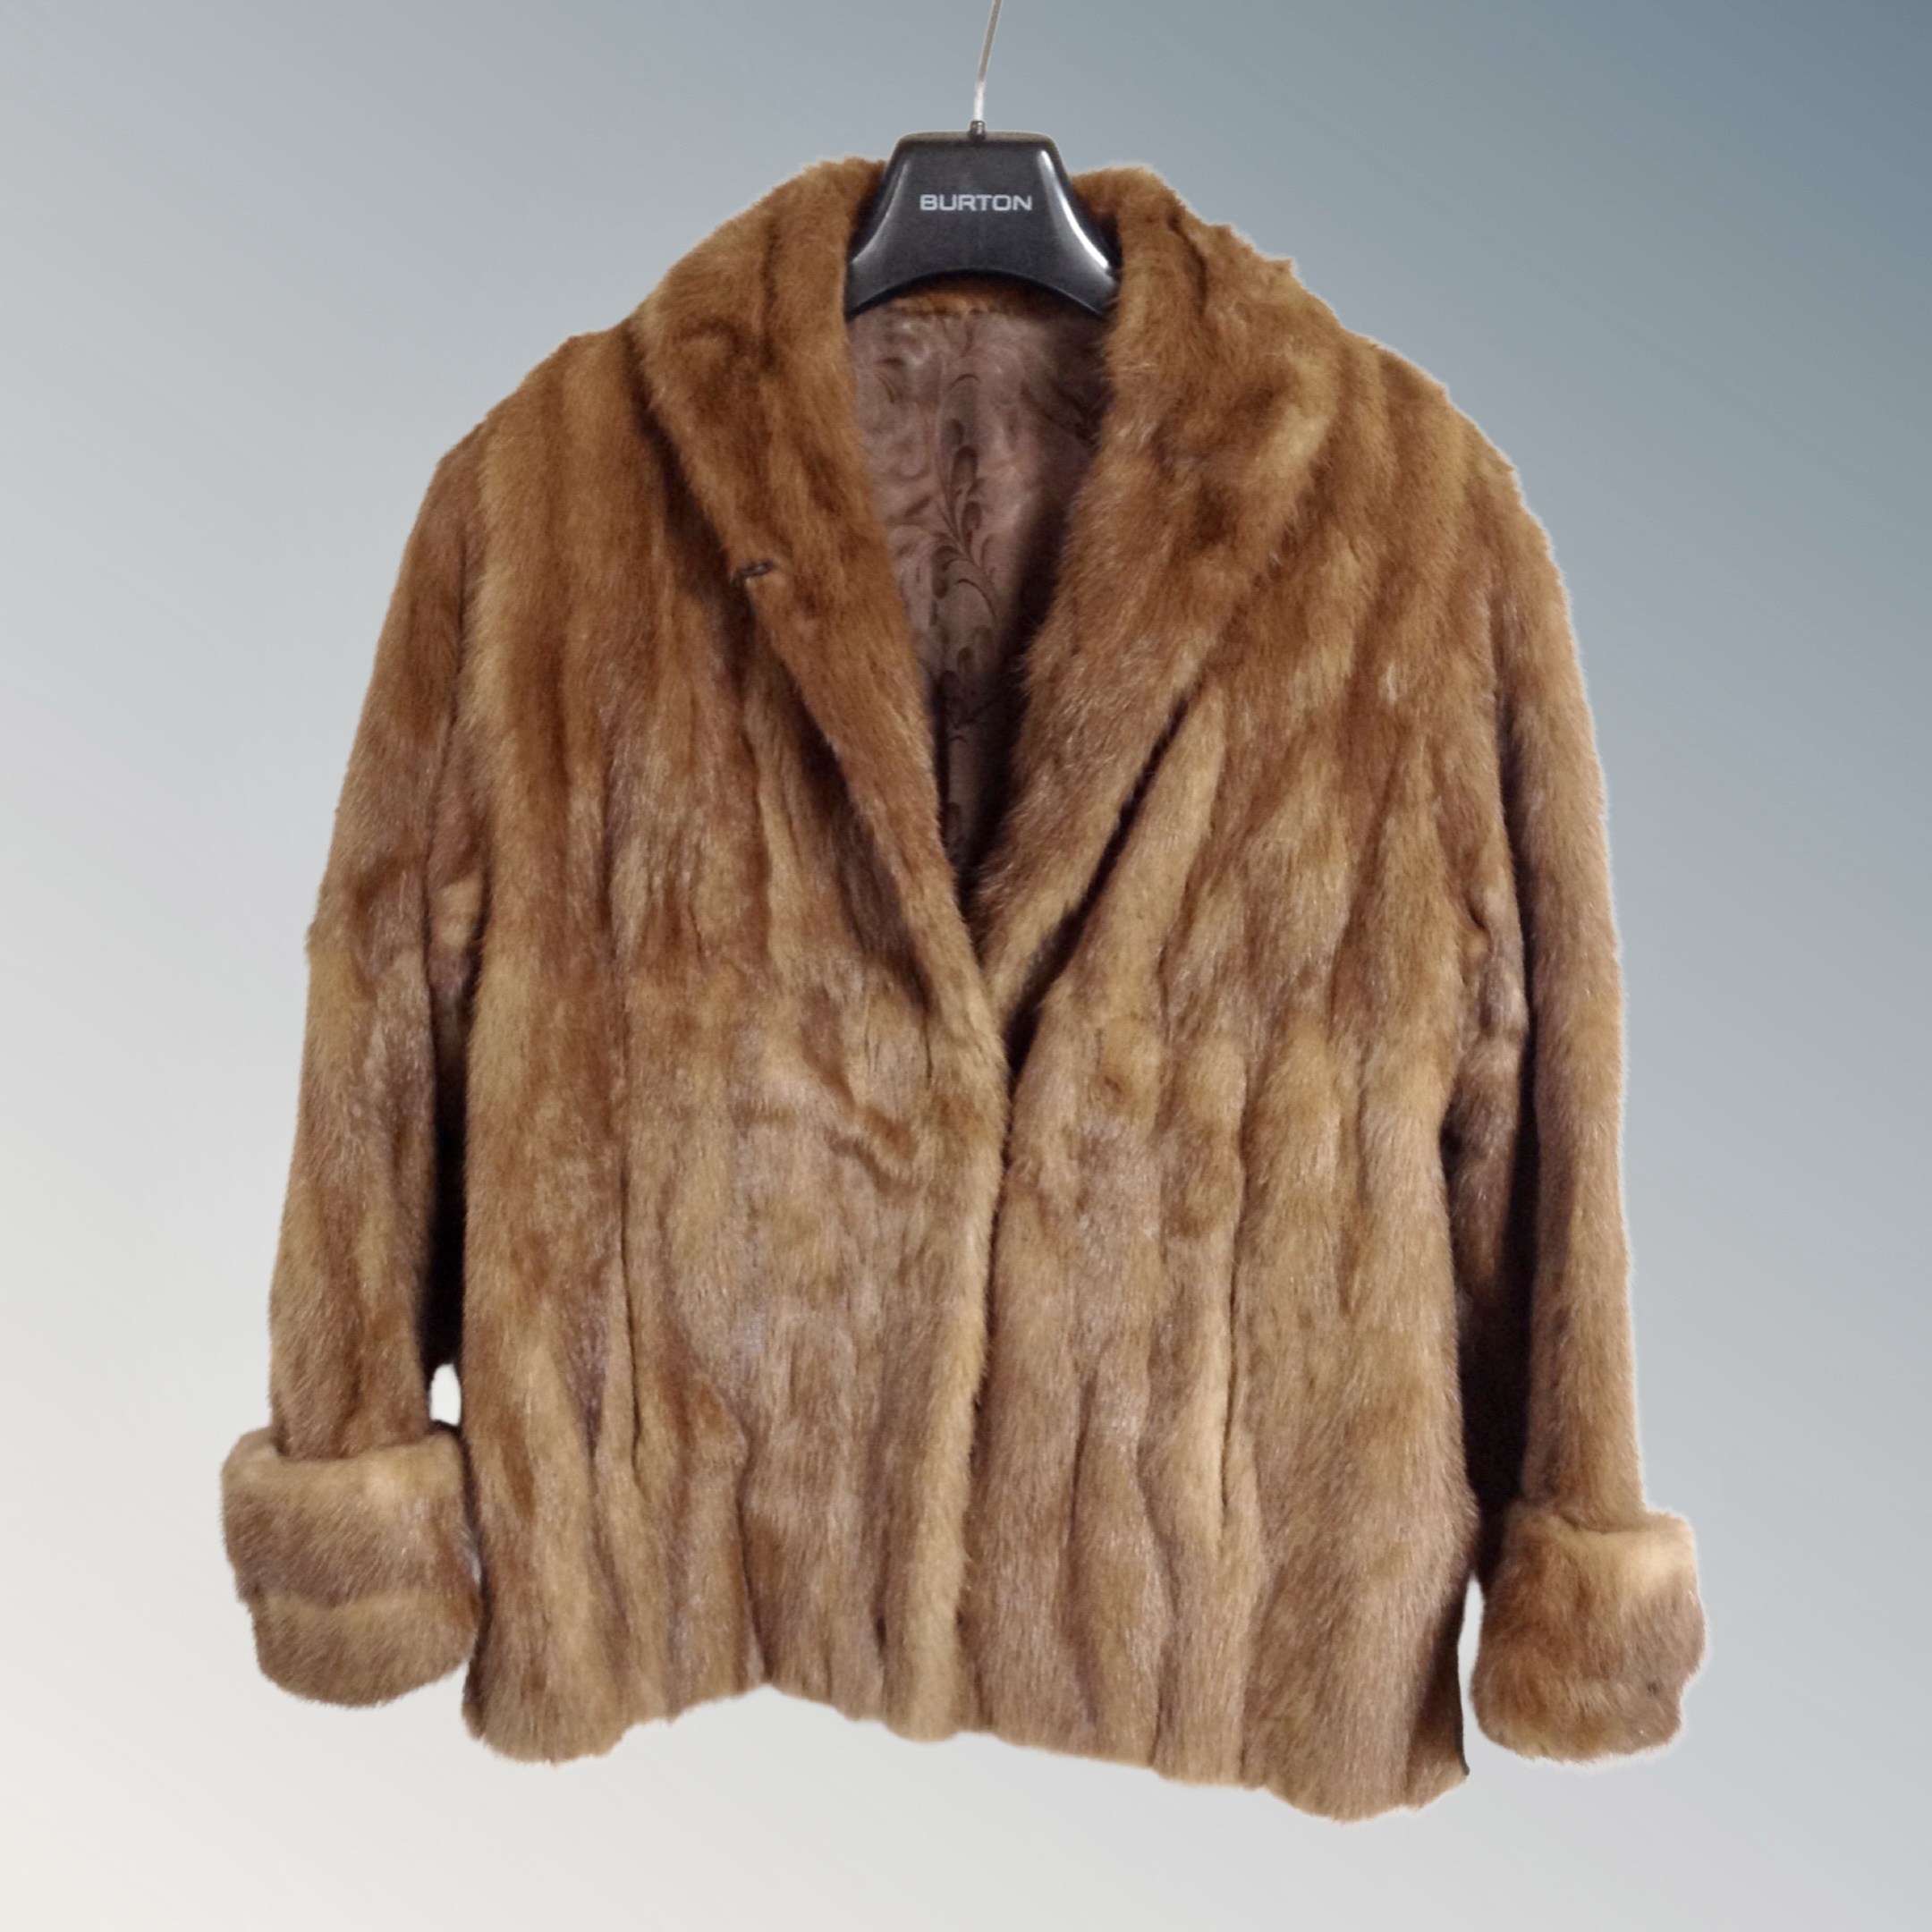 An early 20th century brown mink fur coat.